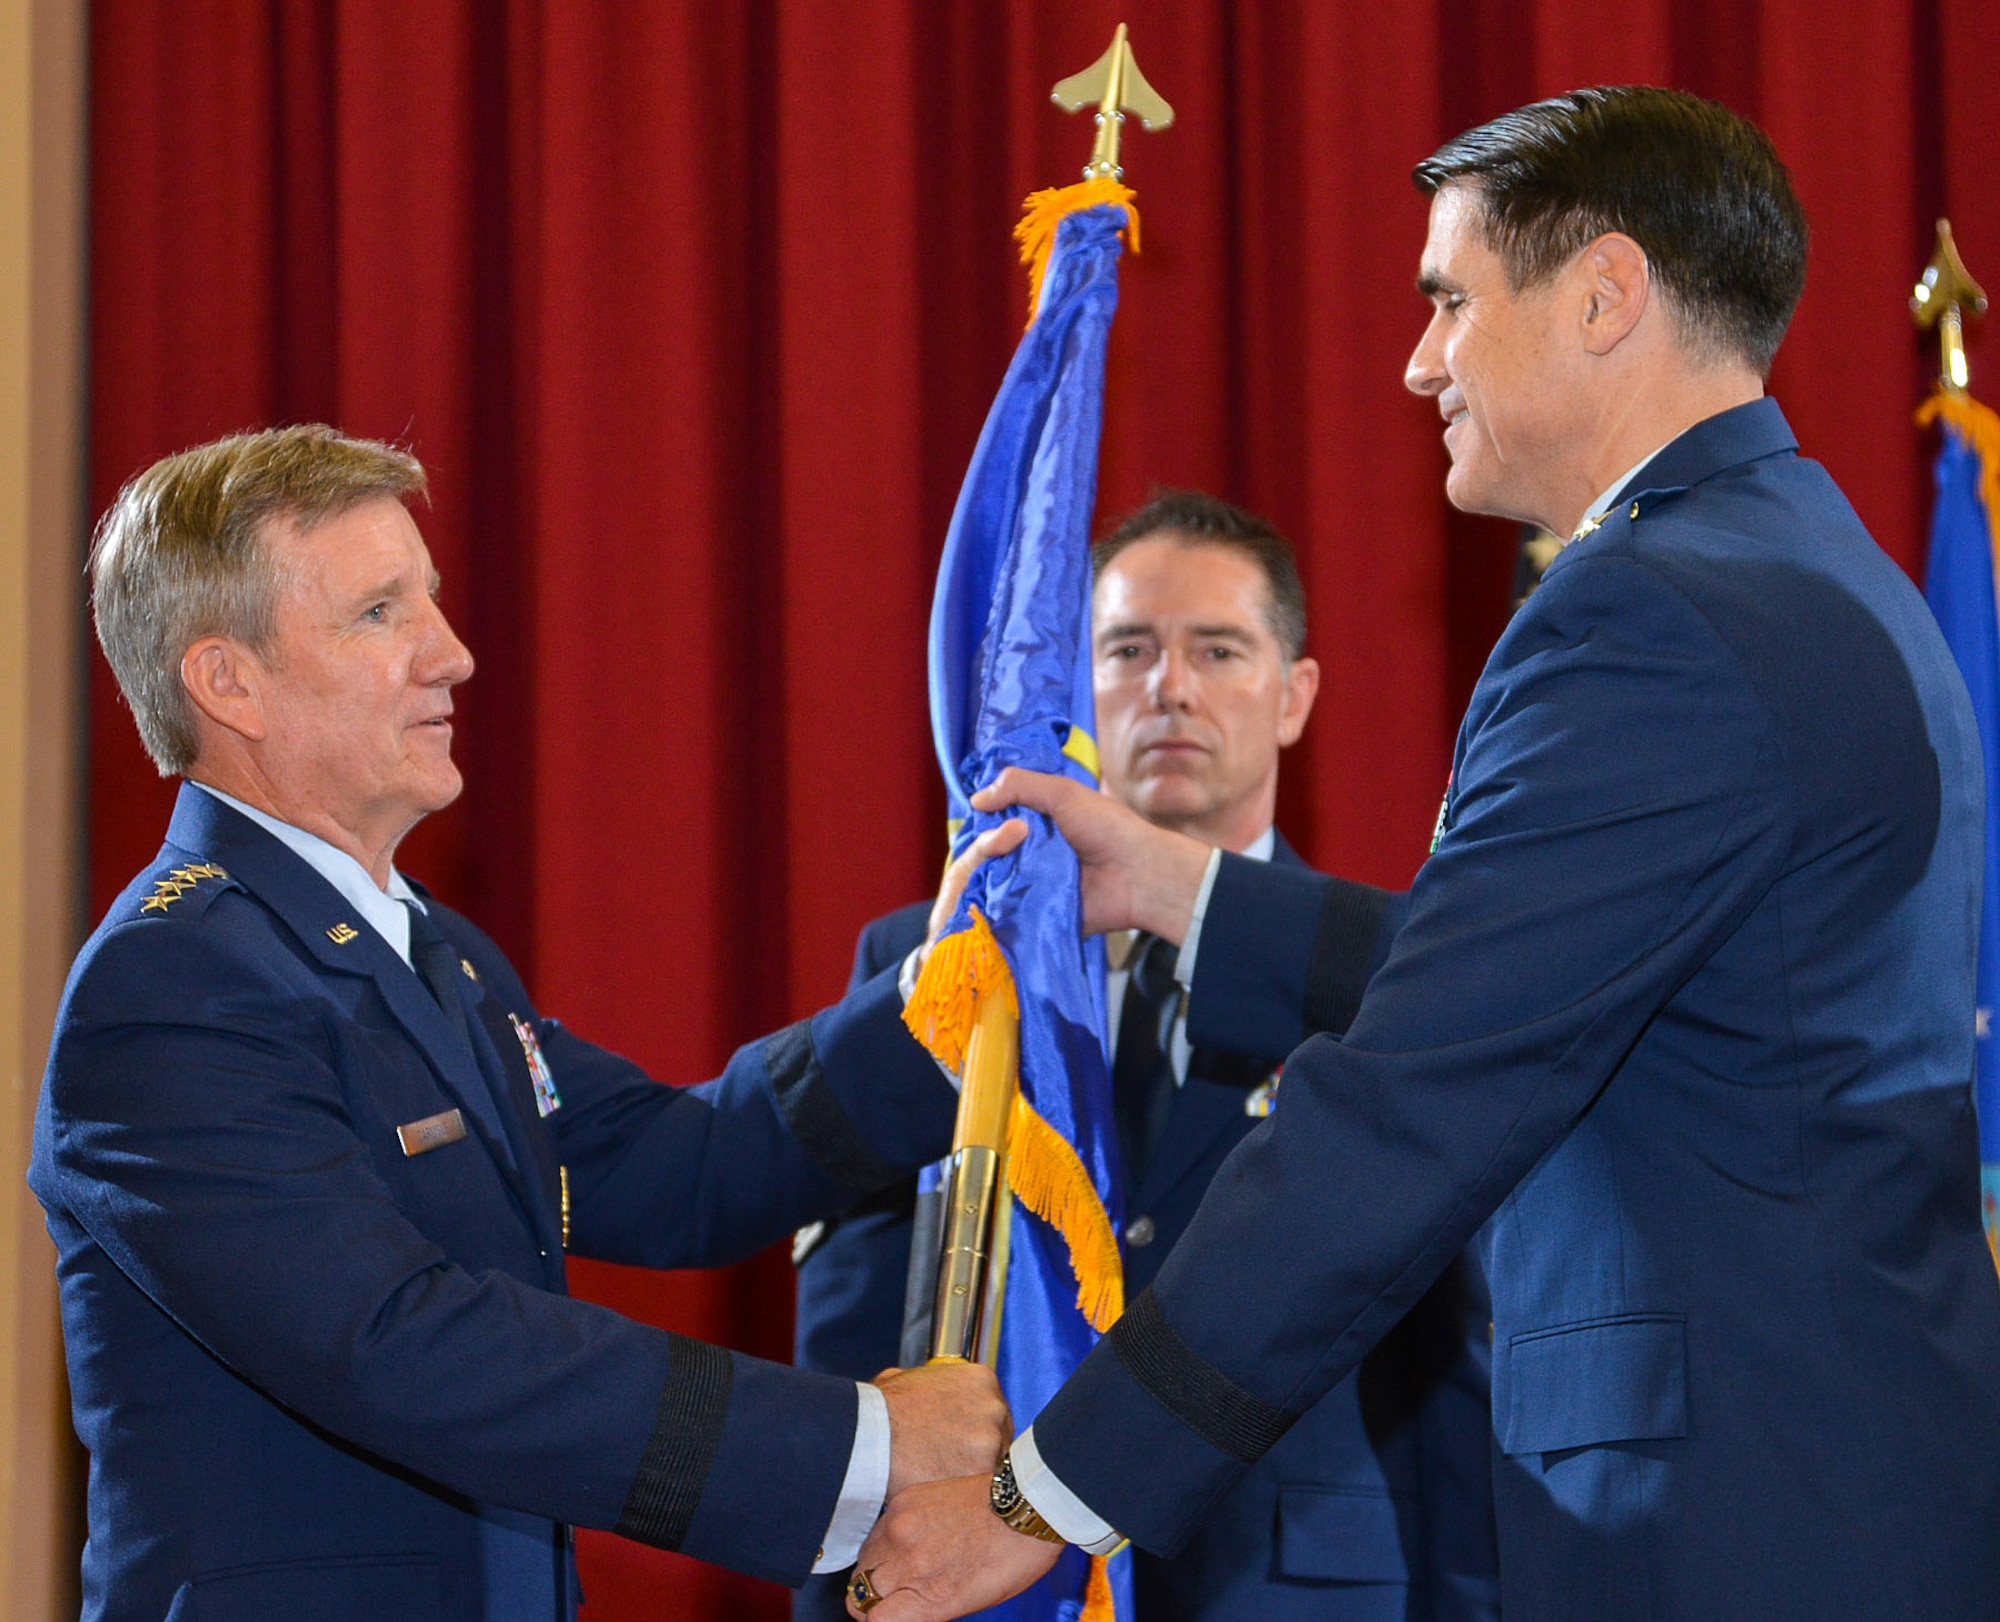 Gen. Herbert J. “Hawk” Carlisle, Commander, Air Combat Command, passes the 25th Air Force flag to Major Gen. Bradford J. “B.J.” Shwedo during the change of command ceremony on 3 Aug., 2015. (USAF photo by William B. Belcher)